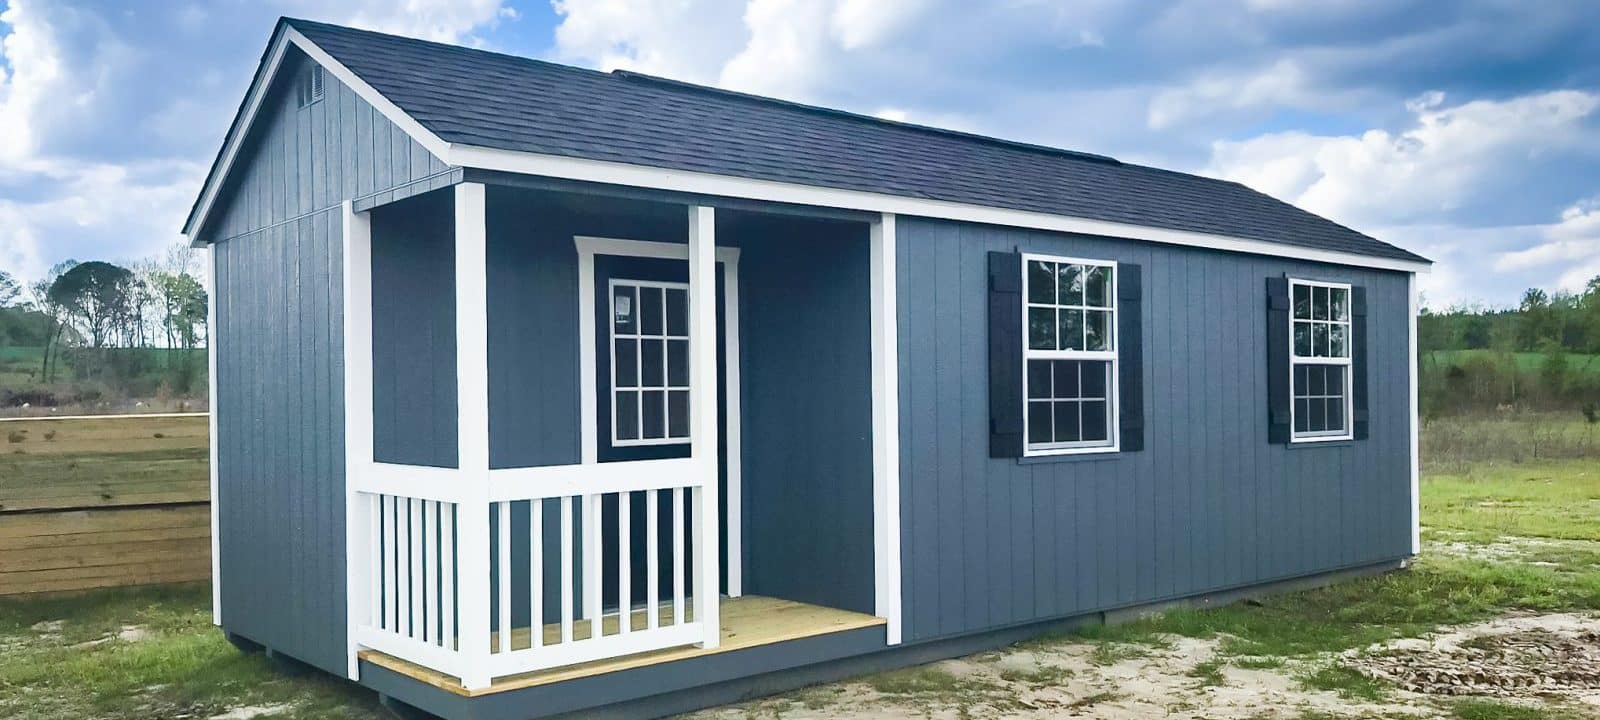 custom sheds with front porch 1600x1600 1